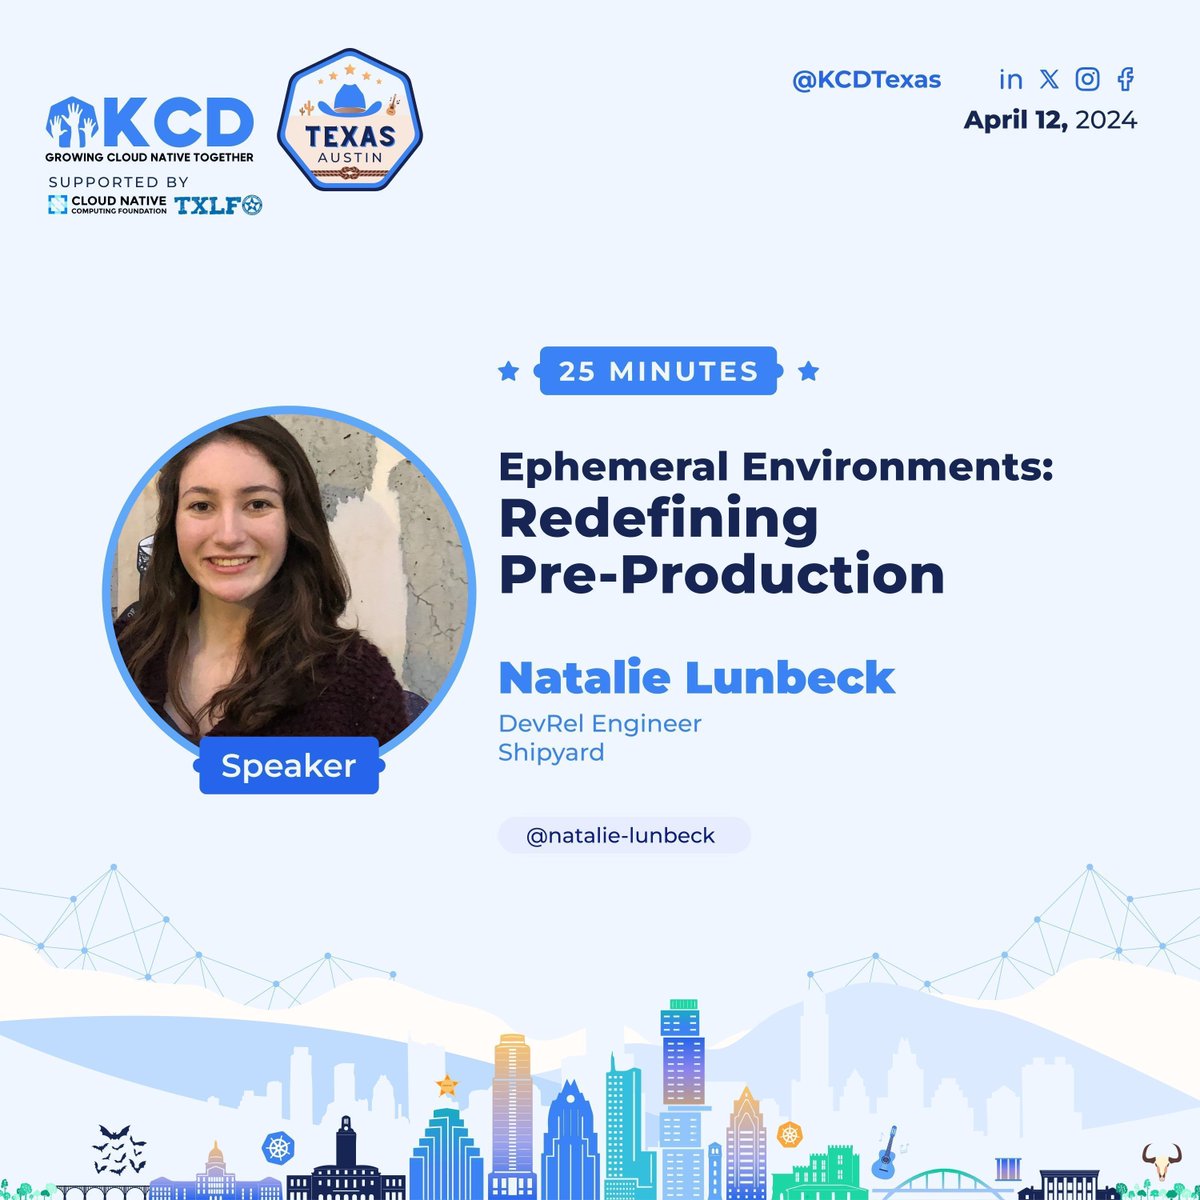 Redefine your dev process with Natalie Lunbeck at #KCDTexas! Learn how ephemeral environments are revolutionizing pre-production for faster, more reliable testing.💡 Don't miss this transformative talk! 🗓️ Register here: 🔗 texaskcd.com #KCD #CNCF #TXLF #ATX